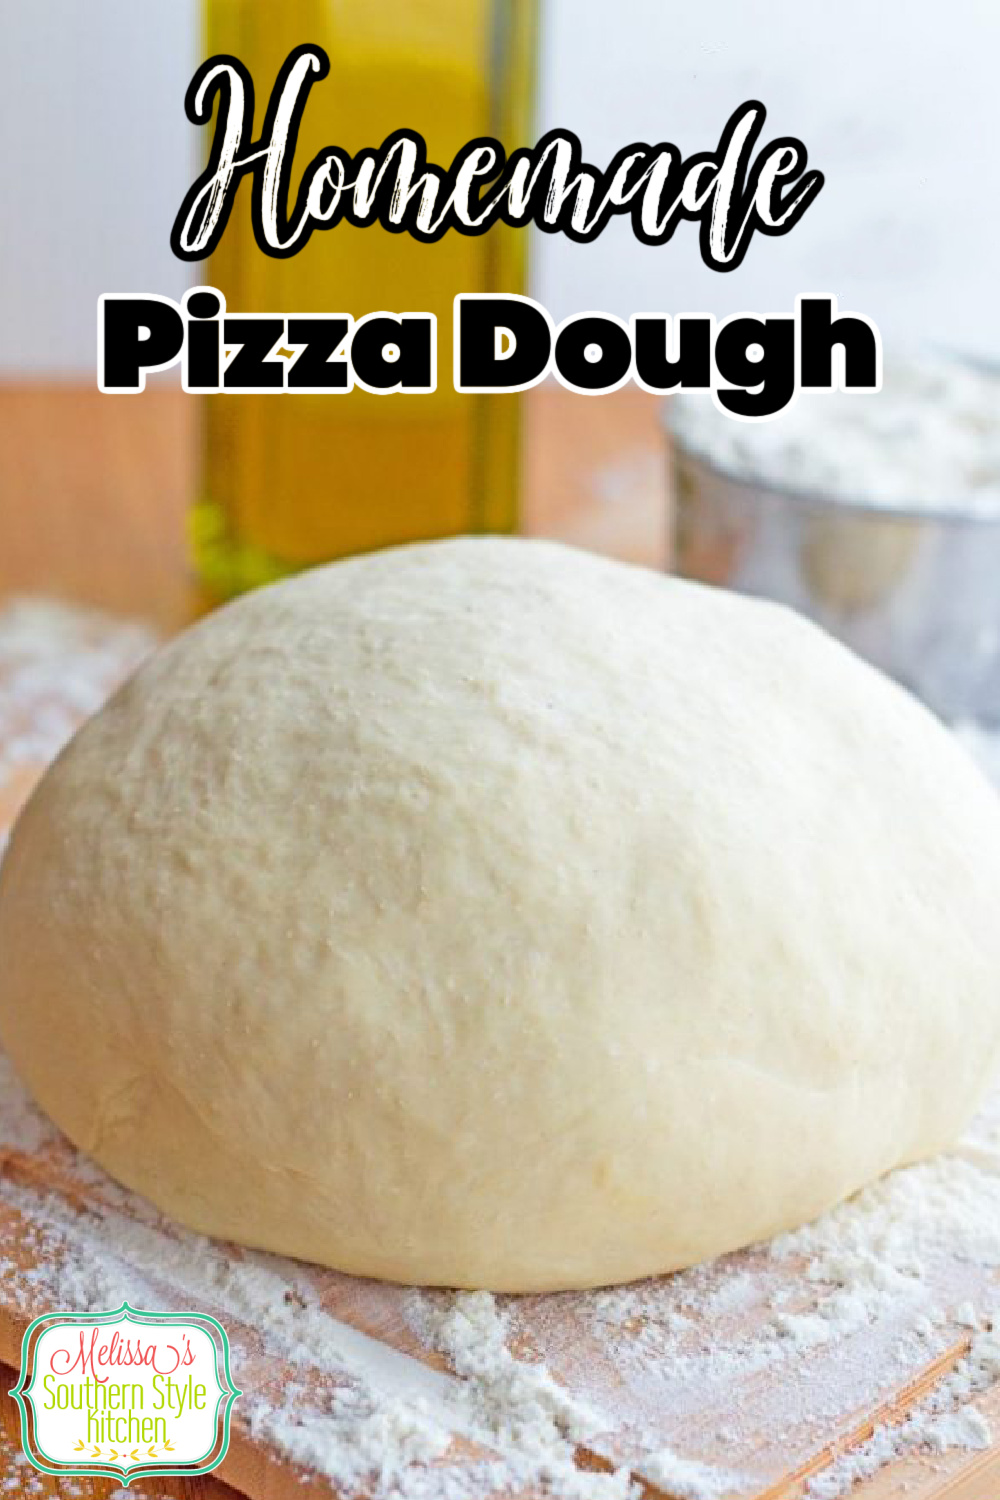 Set up a toppings bar and let everyone build their own pizza using this Homemade Pizza Dough #pizzadough #pizza #pizzarecipes #bestpizzadoughrecipe #homemadepizzadough via @melissasssk